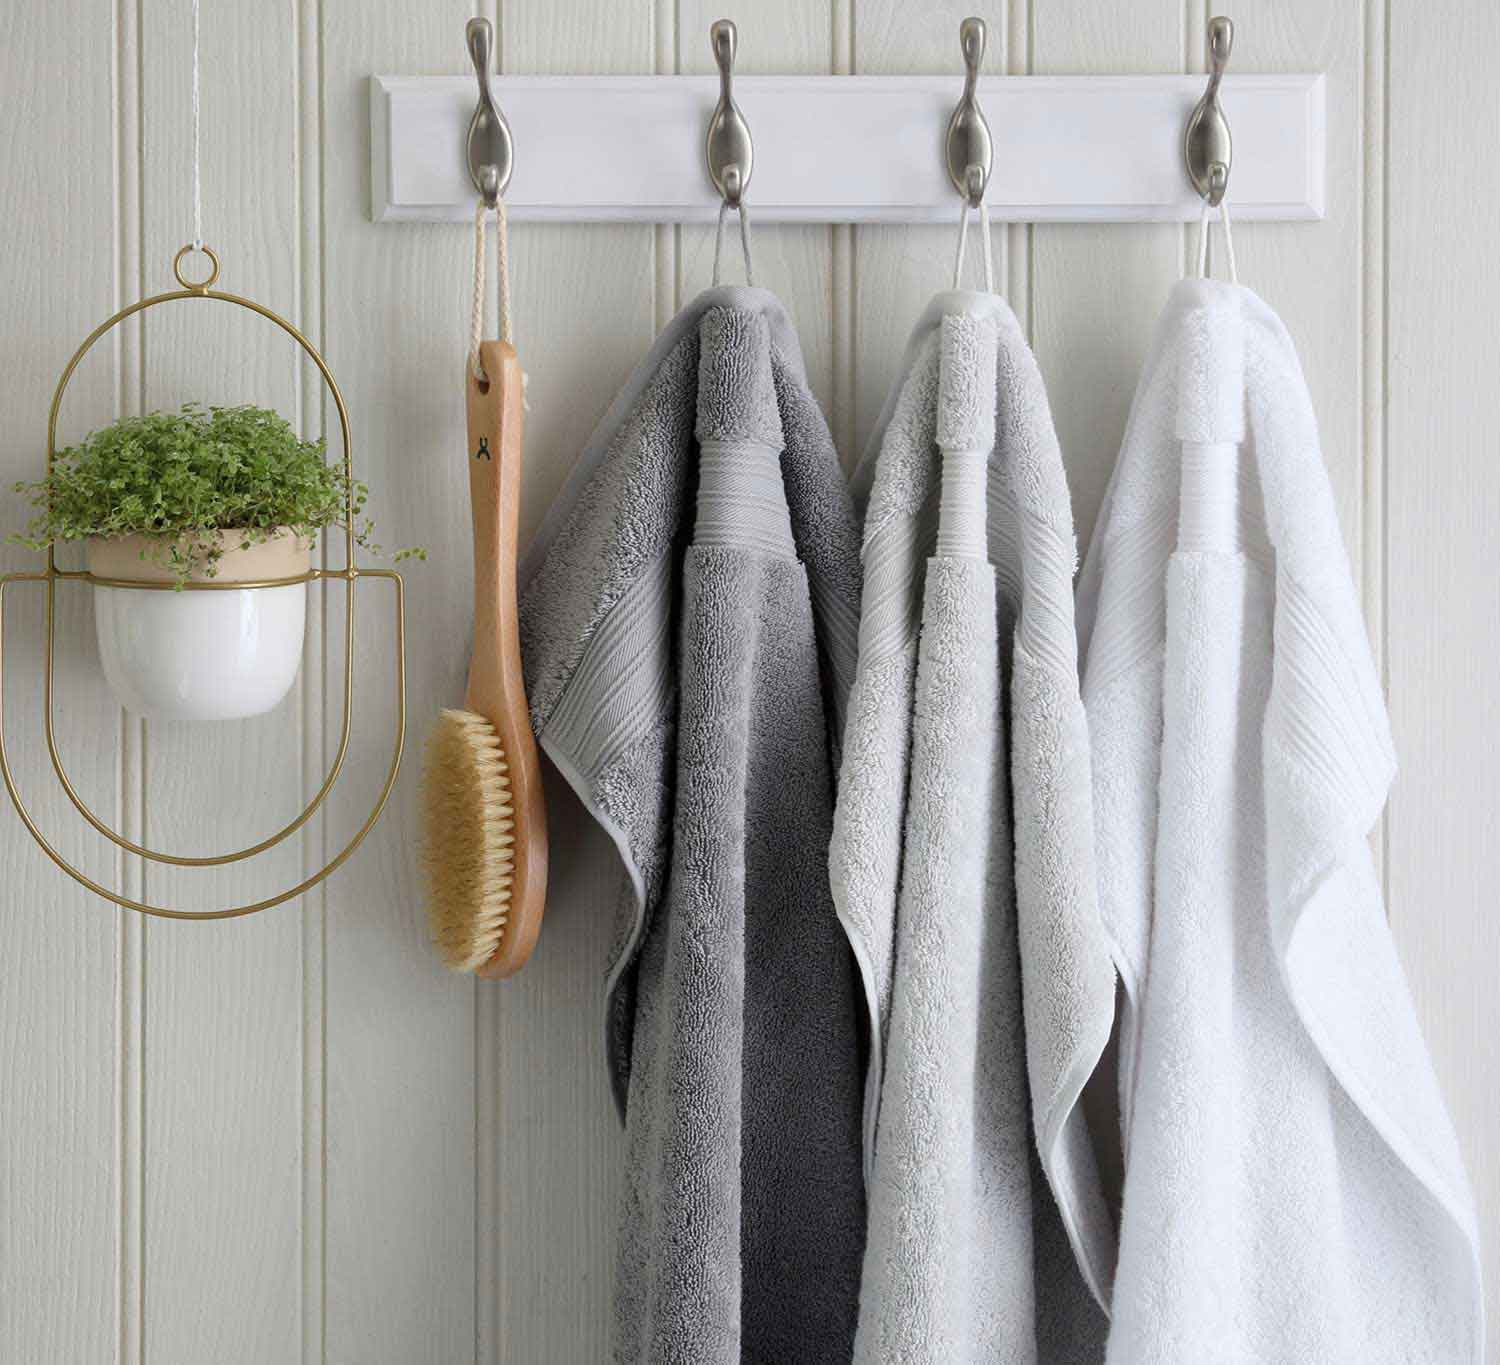 Egyptian Cotton Towels Hanging on Hooks | scooms